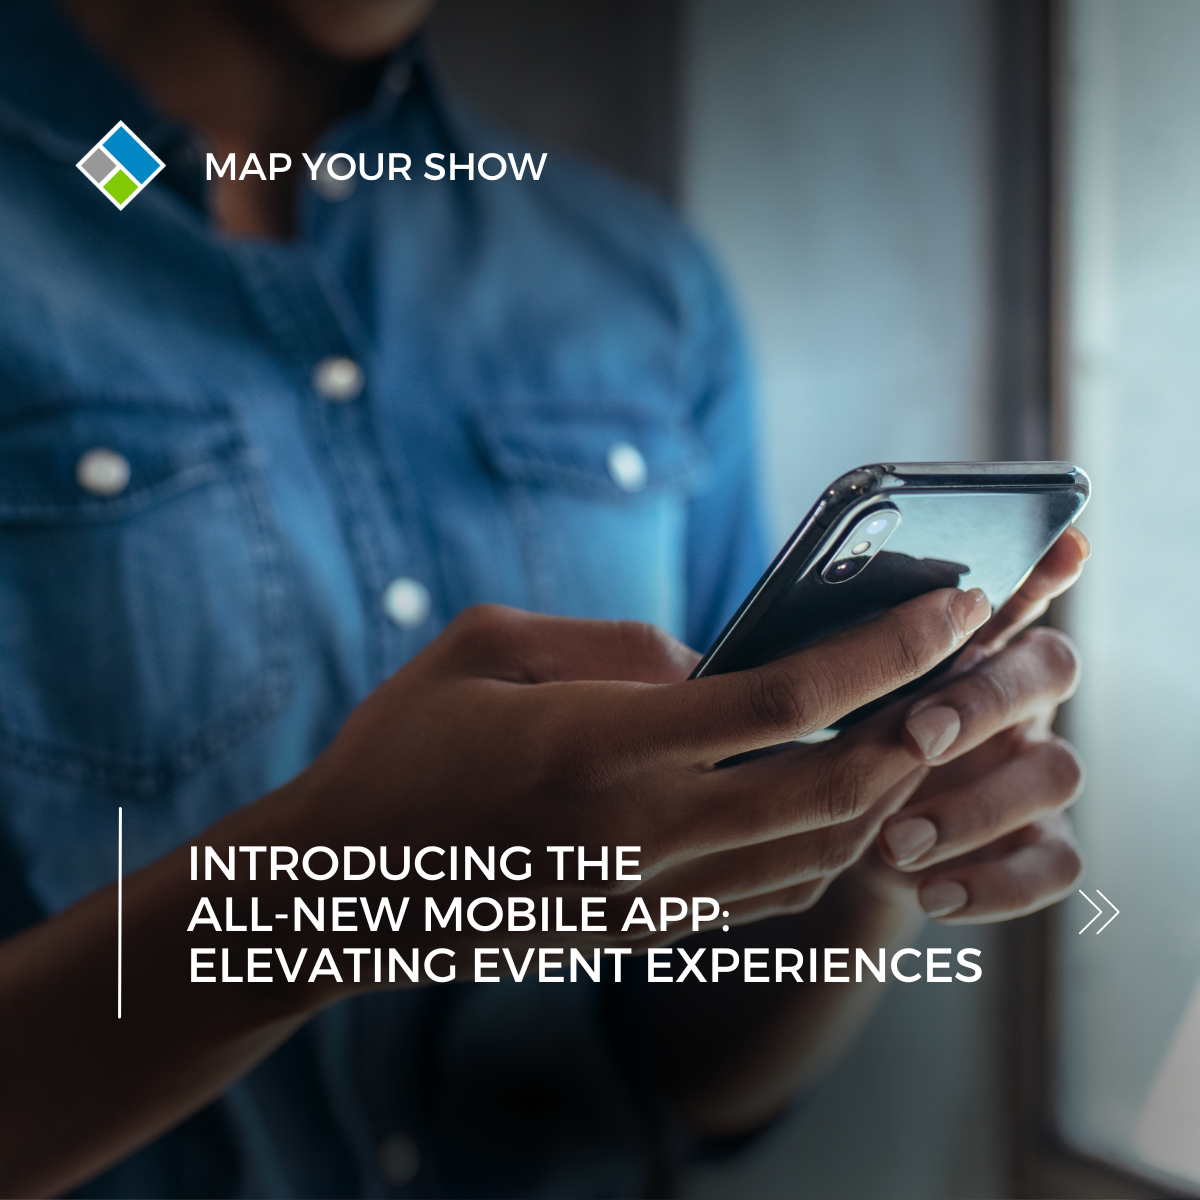 Introducing the All-New Mobile App from Map Your Show: Elevating Event Experiences